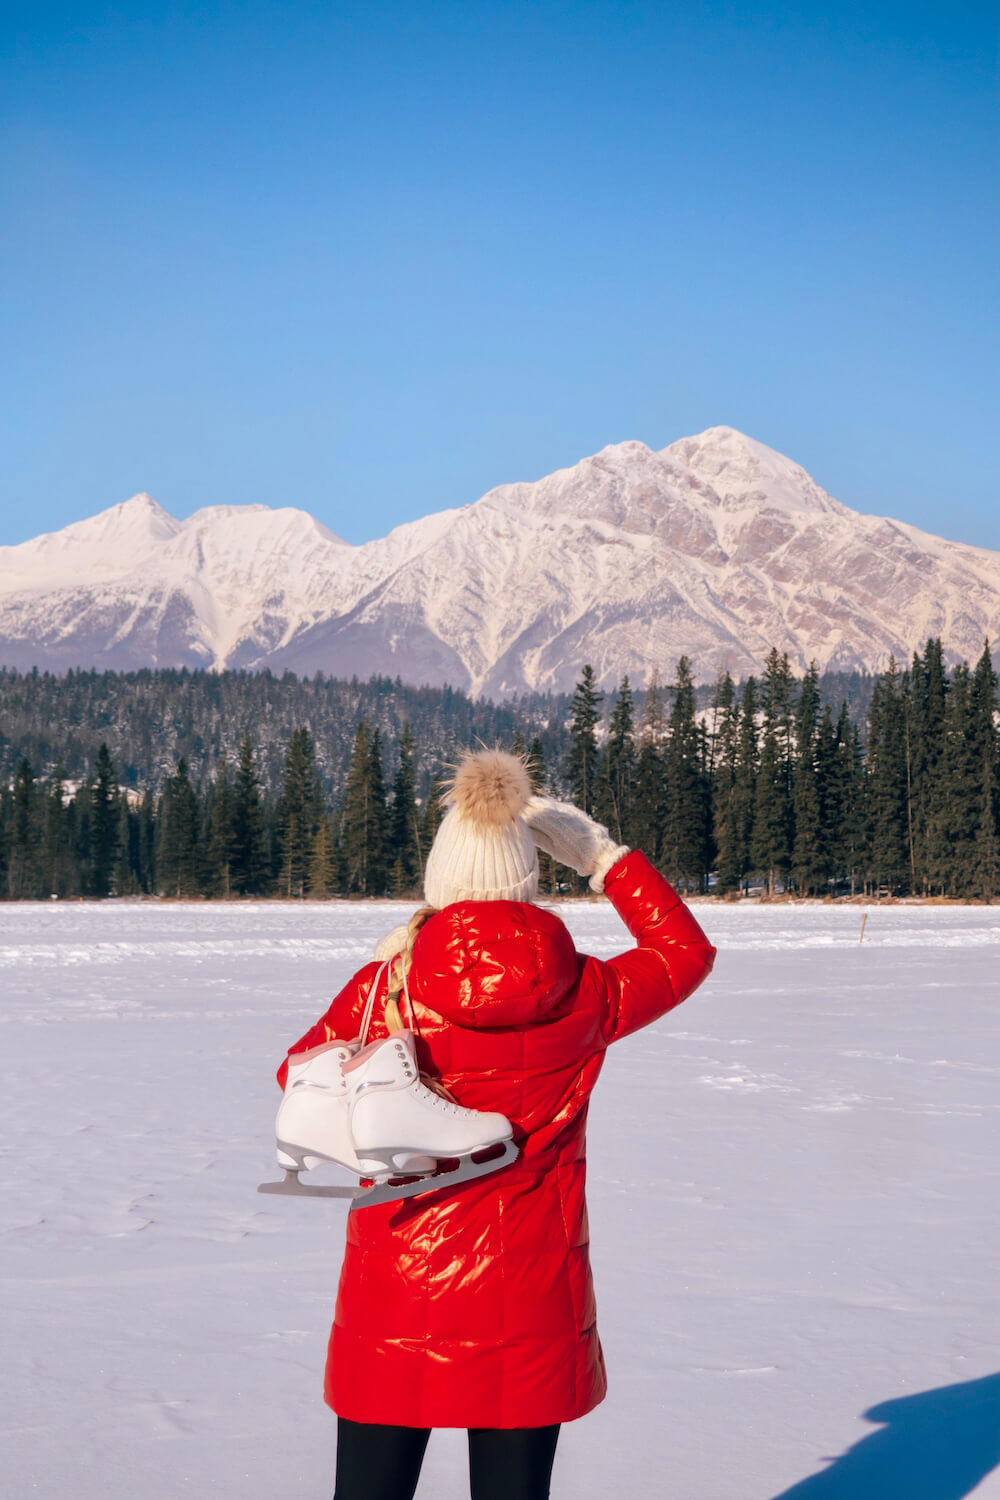 Although most people visit Banff when the weather is warmer, it's absolutely magical to visit in winter. Here's a local's guide to some of the best things to do in in Banff in winter. From hikes and trails to winter sports, family friendly excursions, dining experiences and more. You won't want to miss this guide that will surely convince you to add Banff to your winter travel bucket list. Pictured here: Go skating on a frozen lake surrounded by mountains